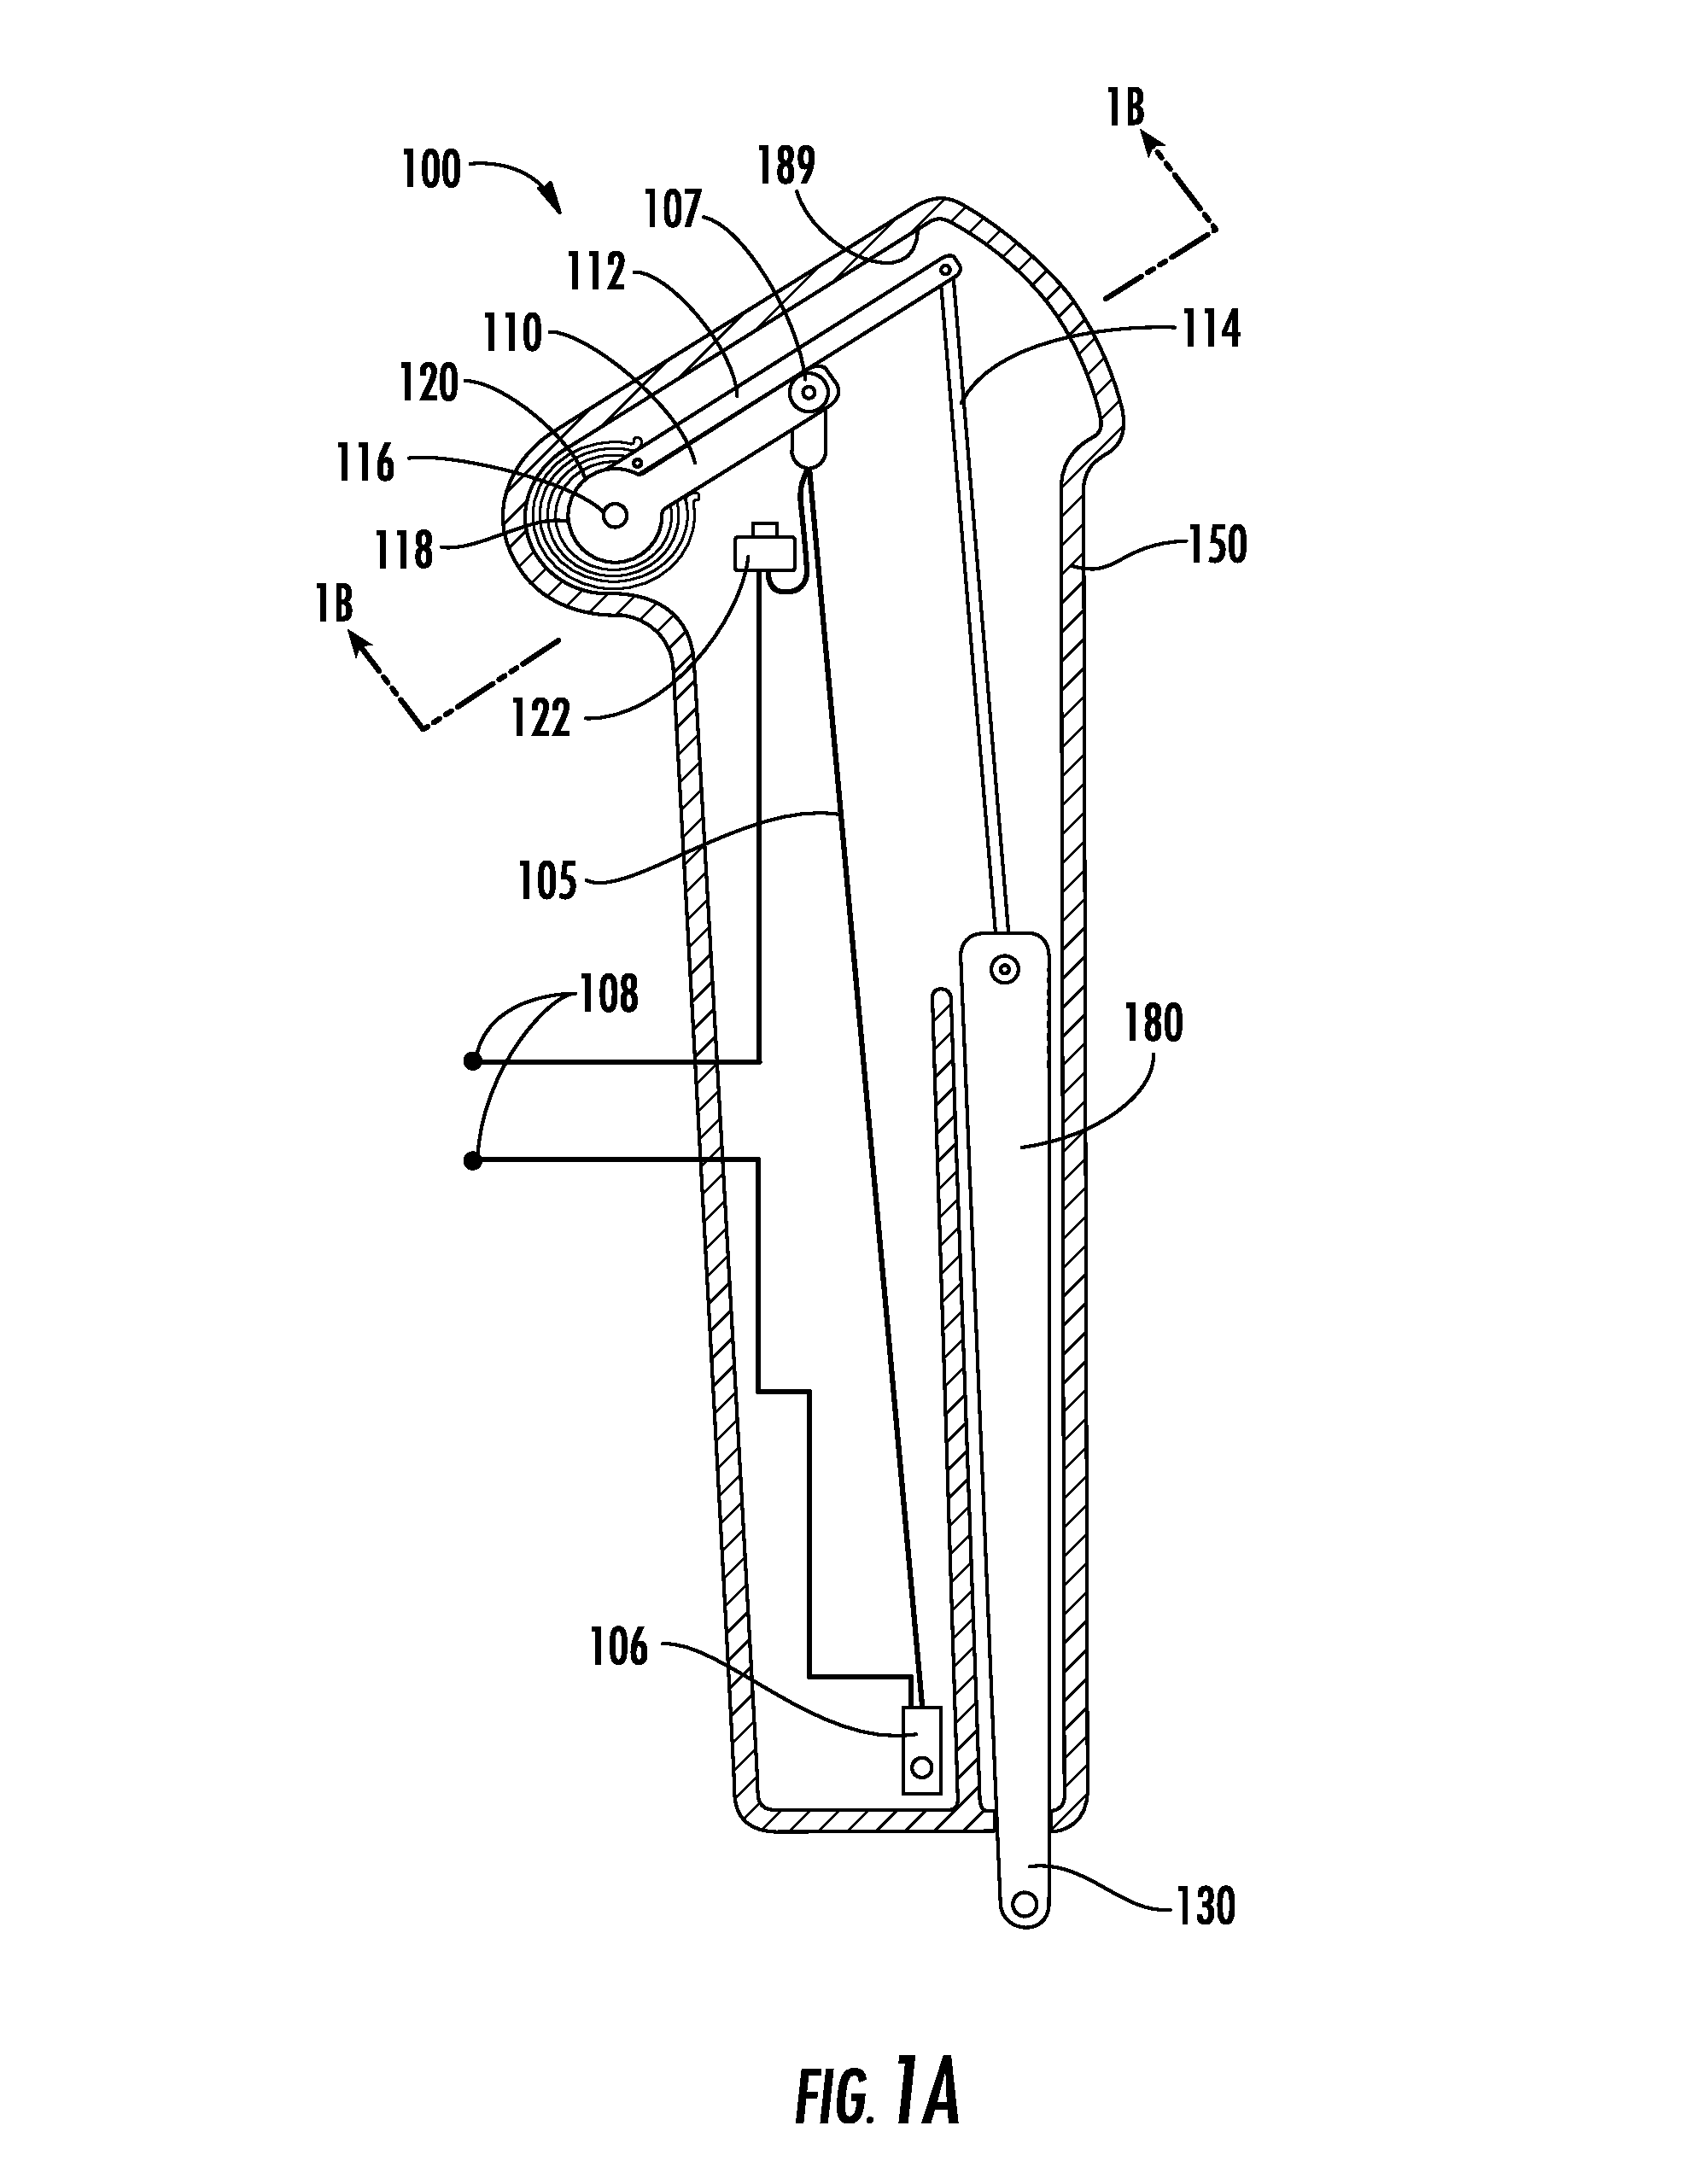 Methods of manufacturing highly integrated SMA actuators